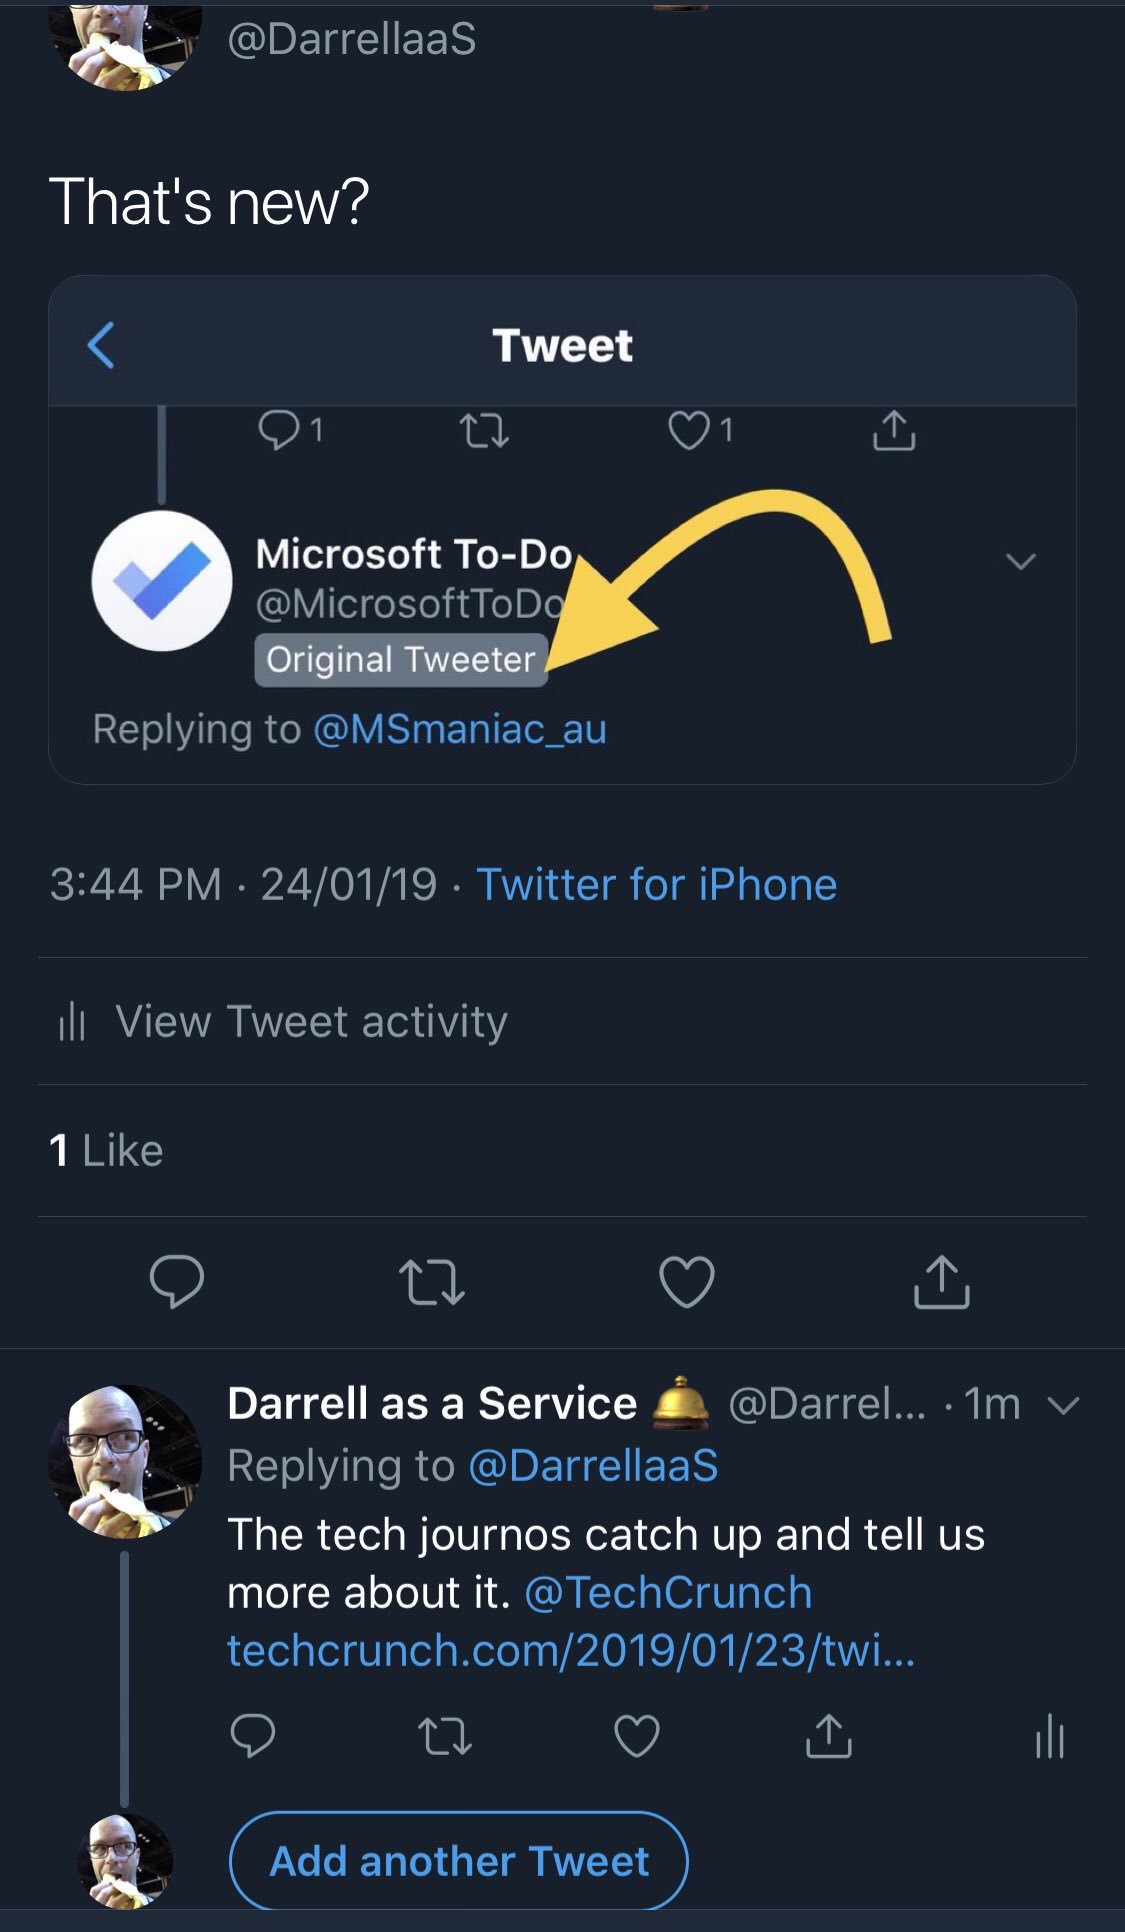 Darrell As A Service Modern Workplace Change Note Originaltweeter Only Appears When They Reply To A Conversation Thread From Their Original Tweet It Won T Appear In A Conversation